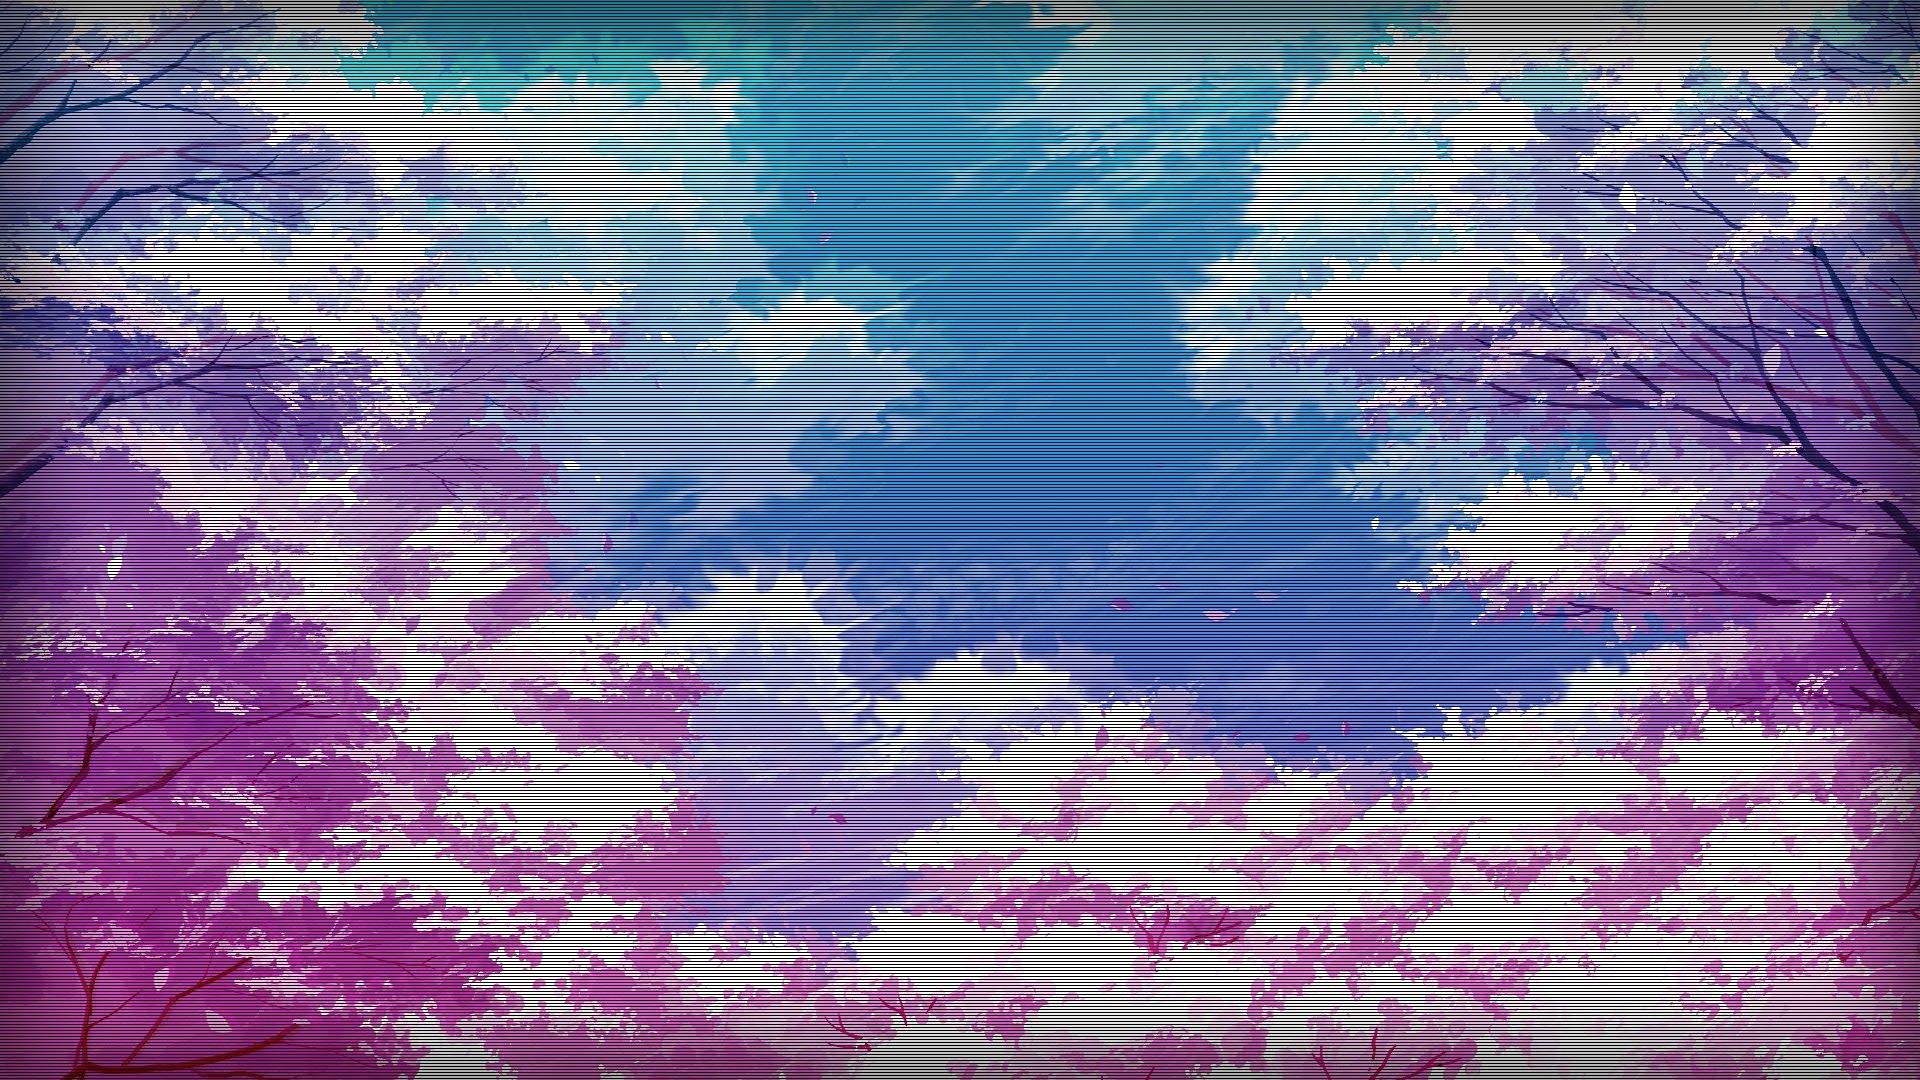 A painting of trees and clouds in the sky - Japanese